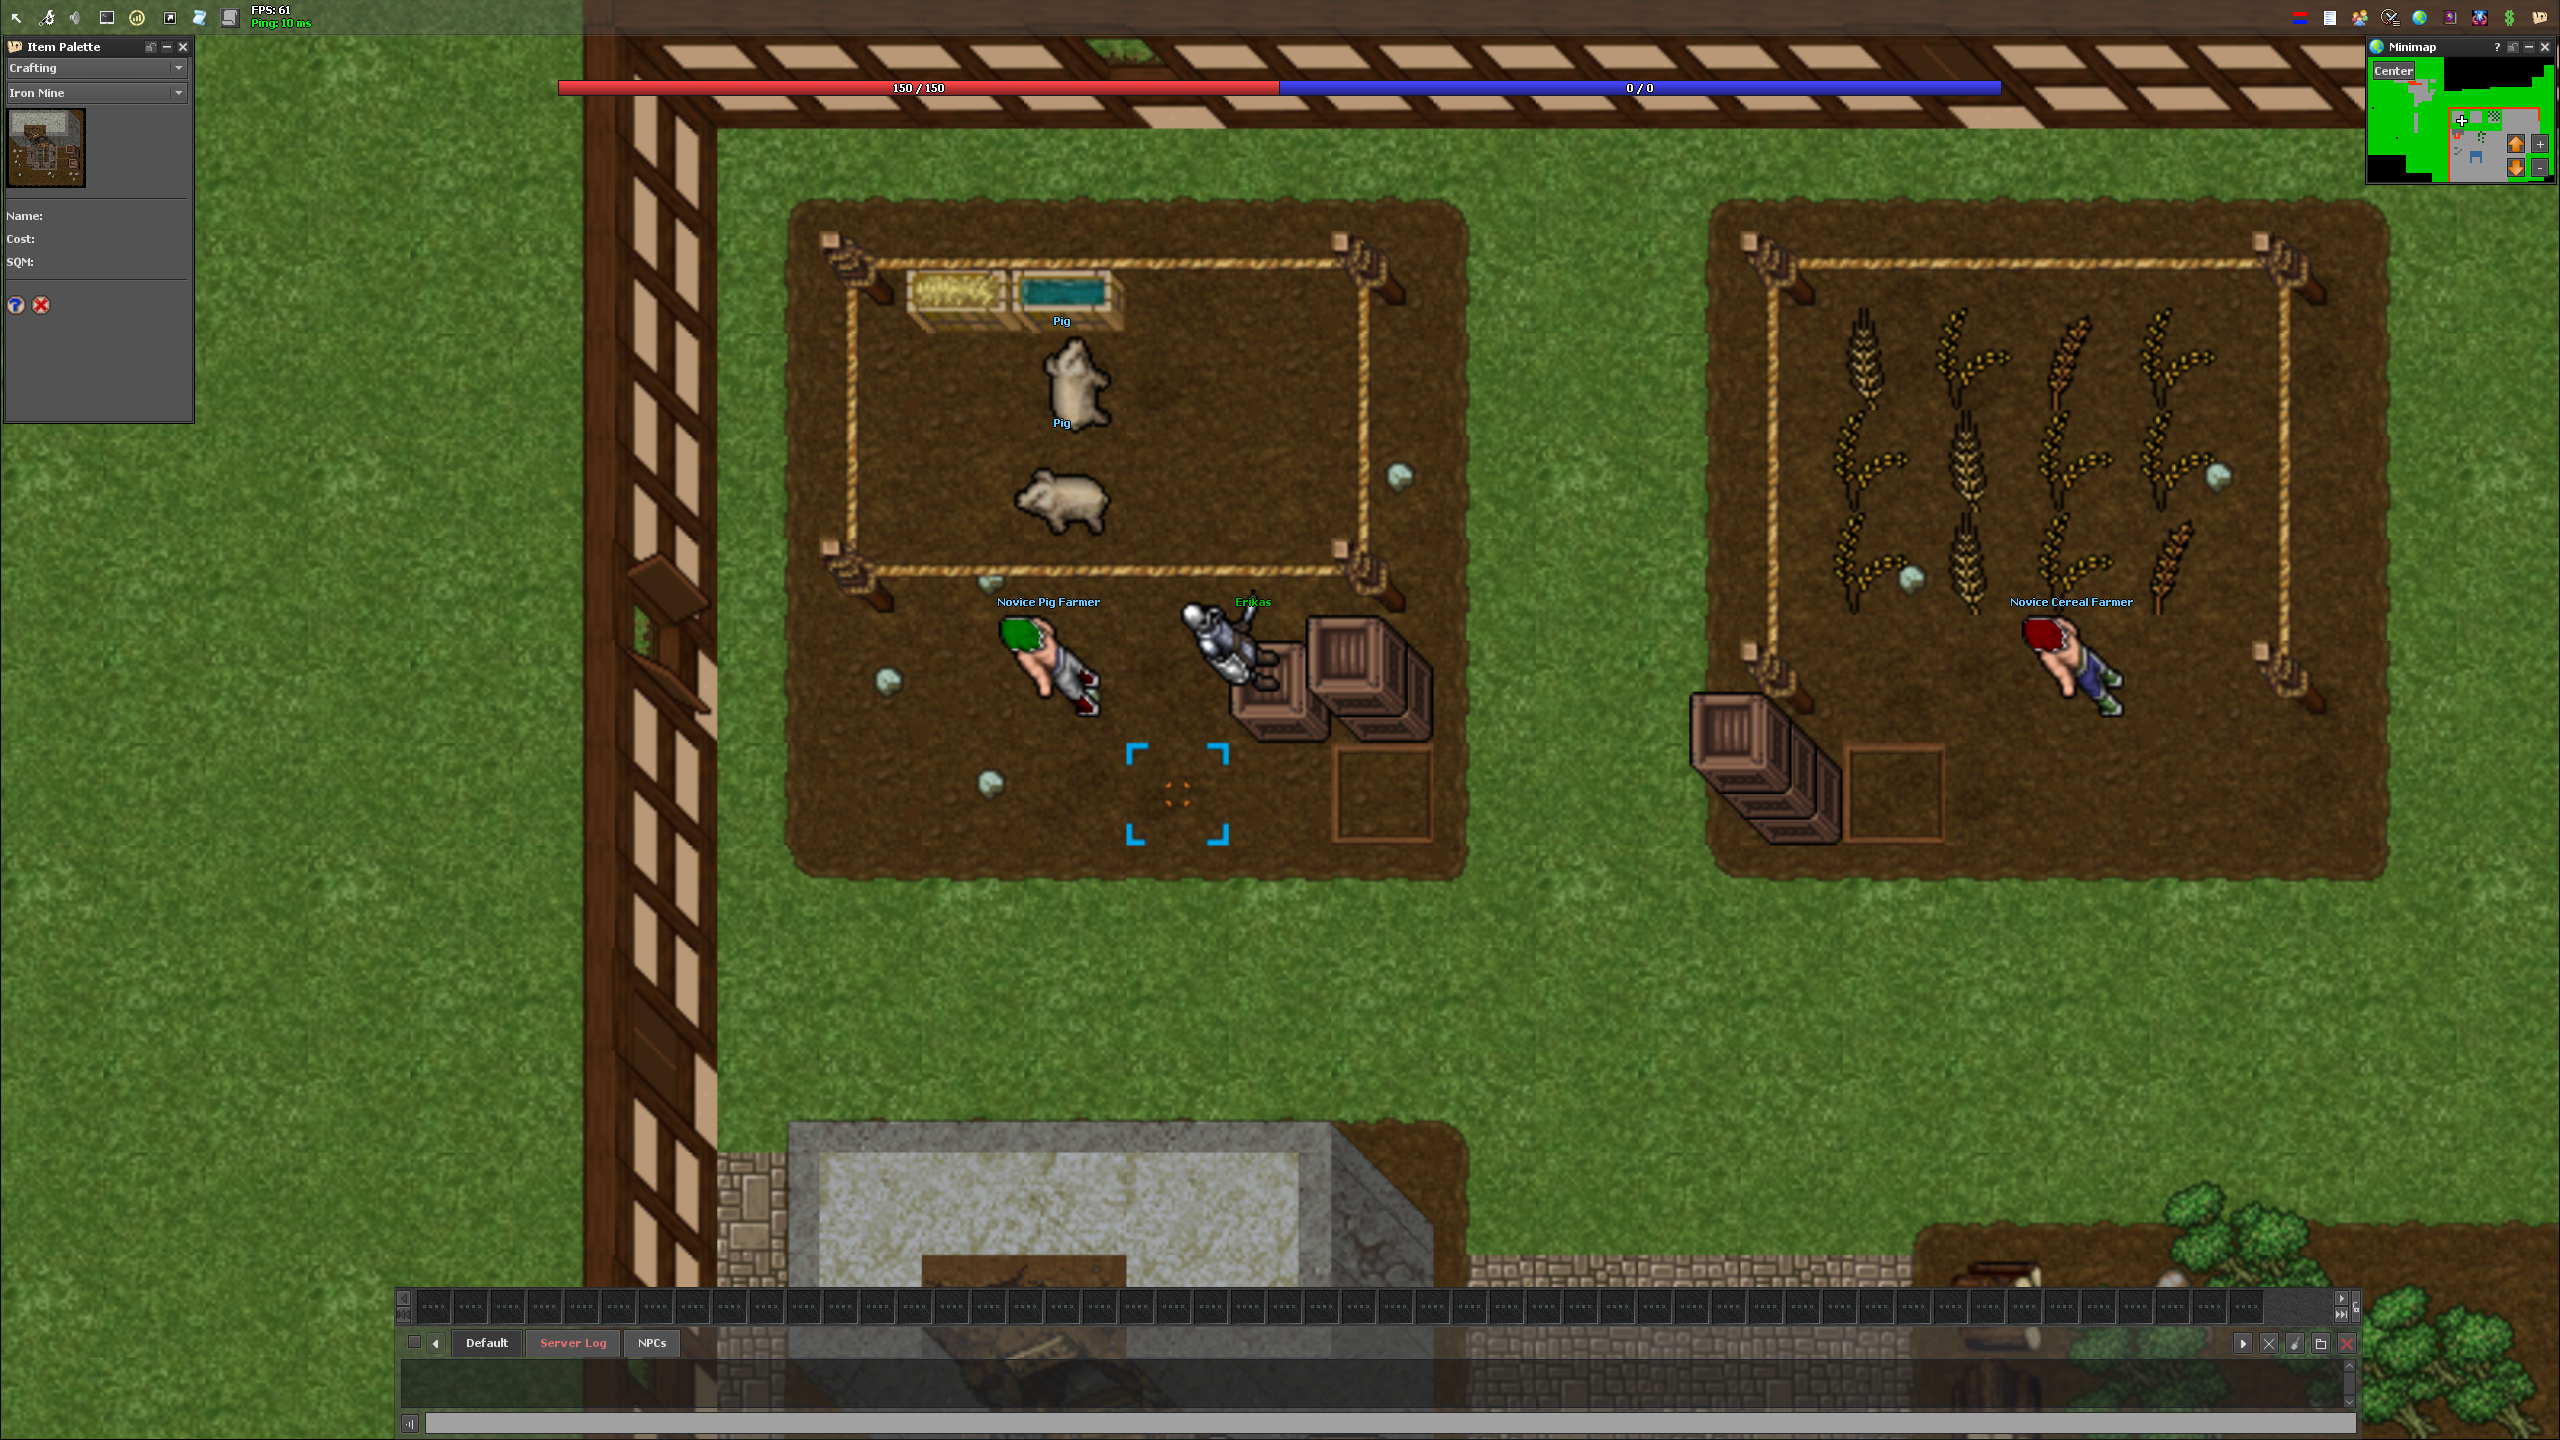 Tibia - Online Game of the Week